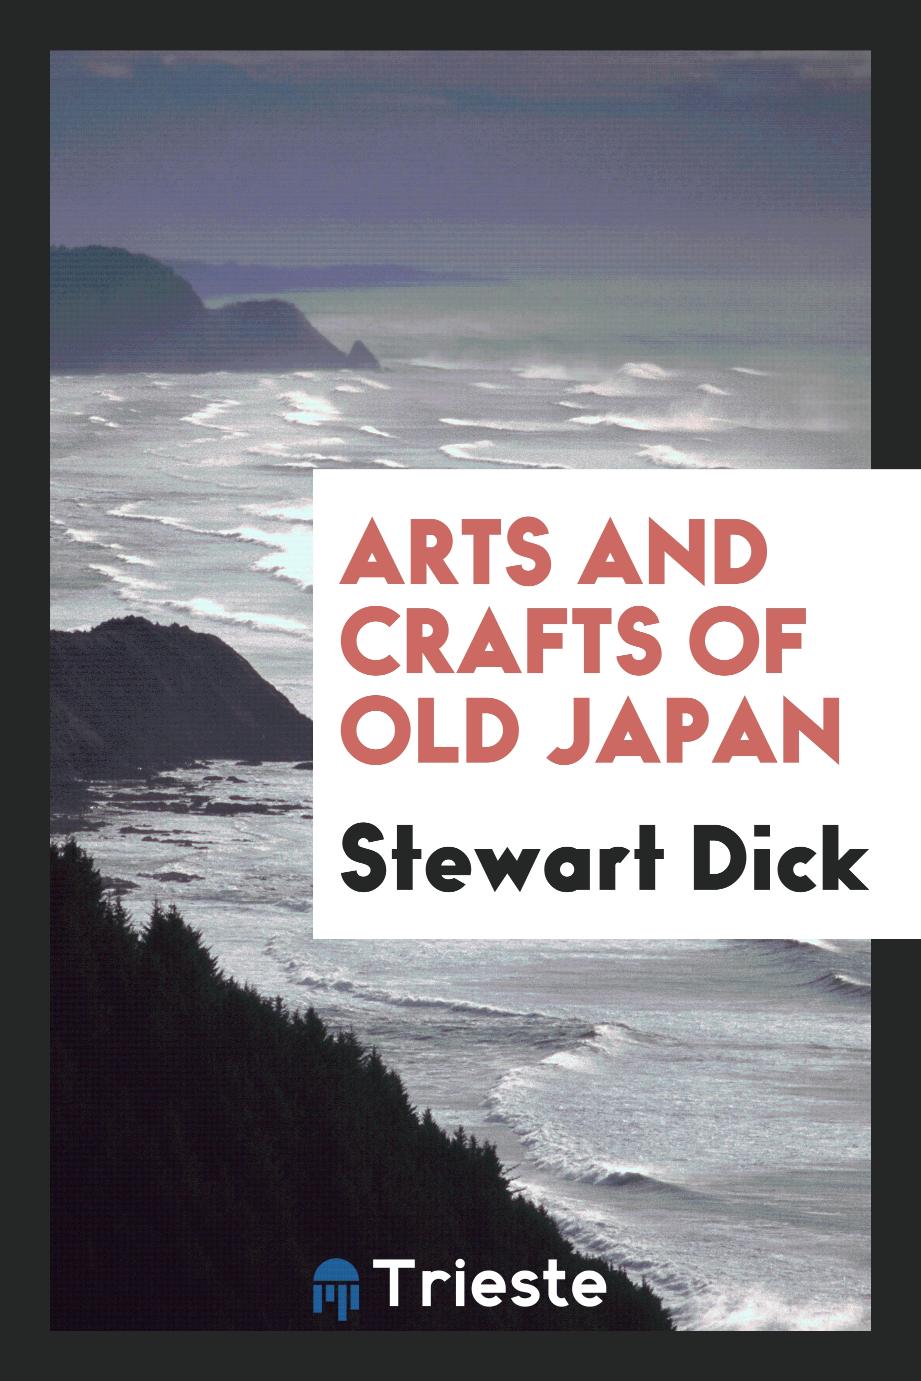 Arts and crafts of old Japan